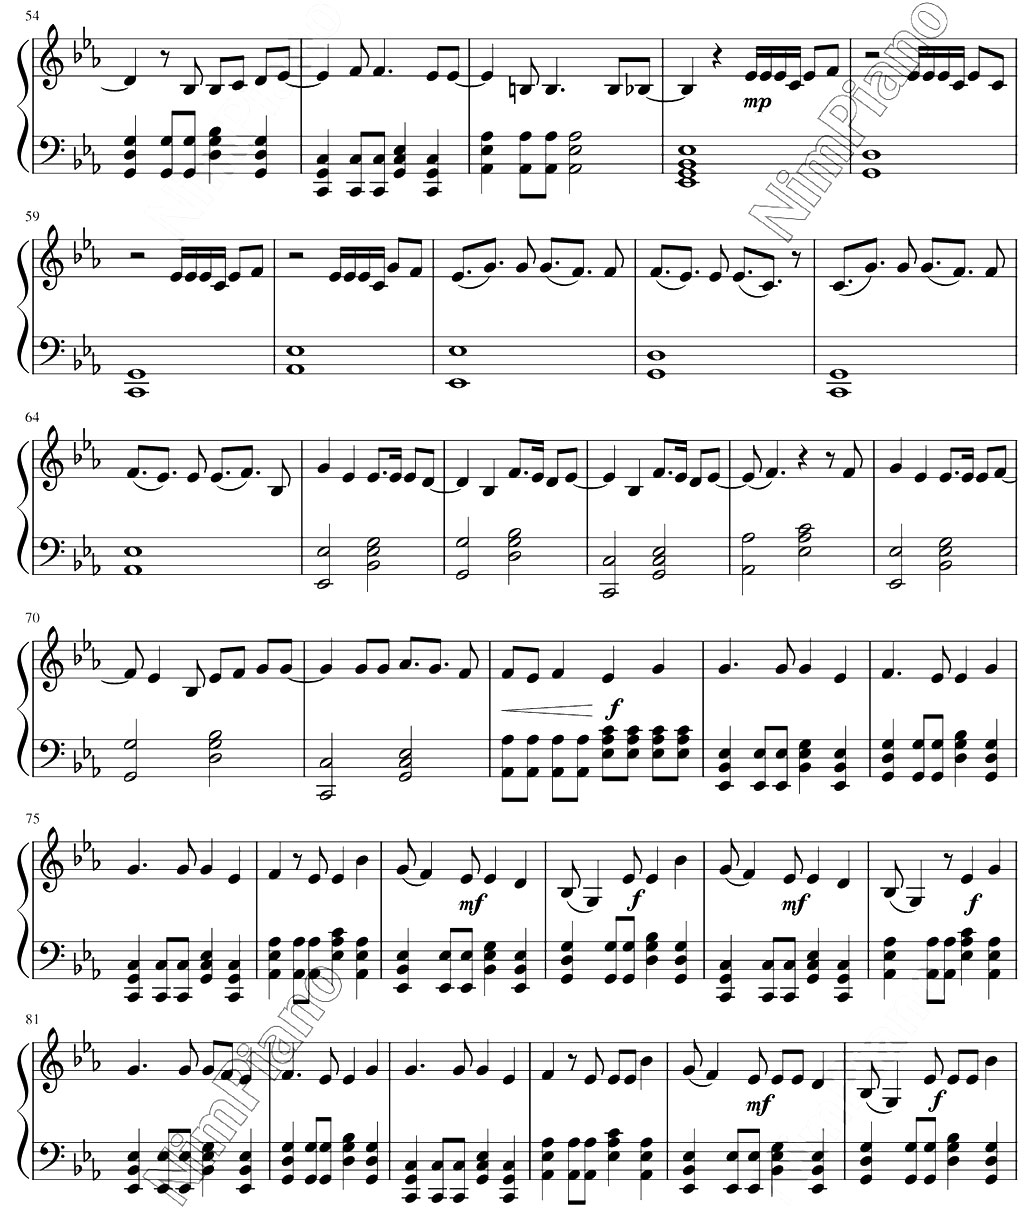 Spring Day (Piano Sheet Music Notes)